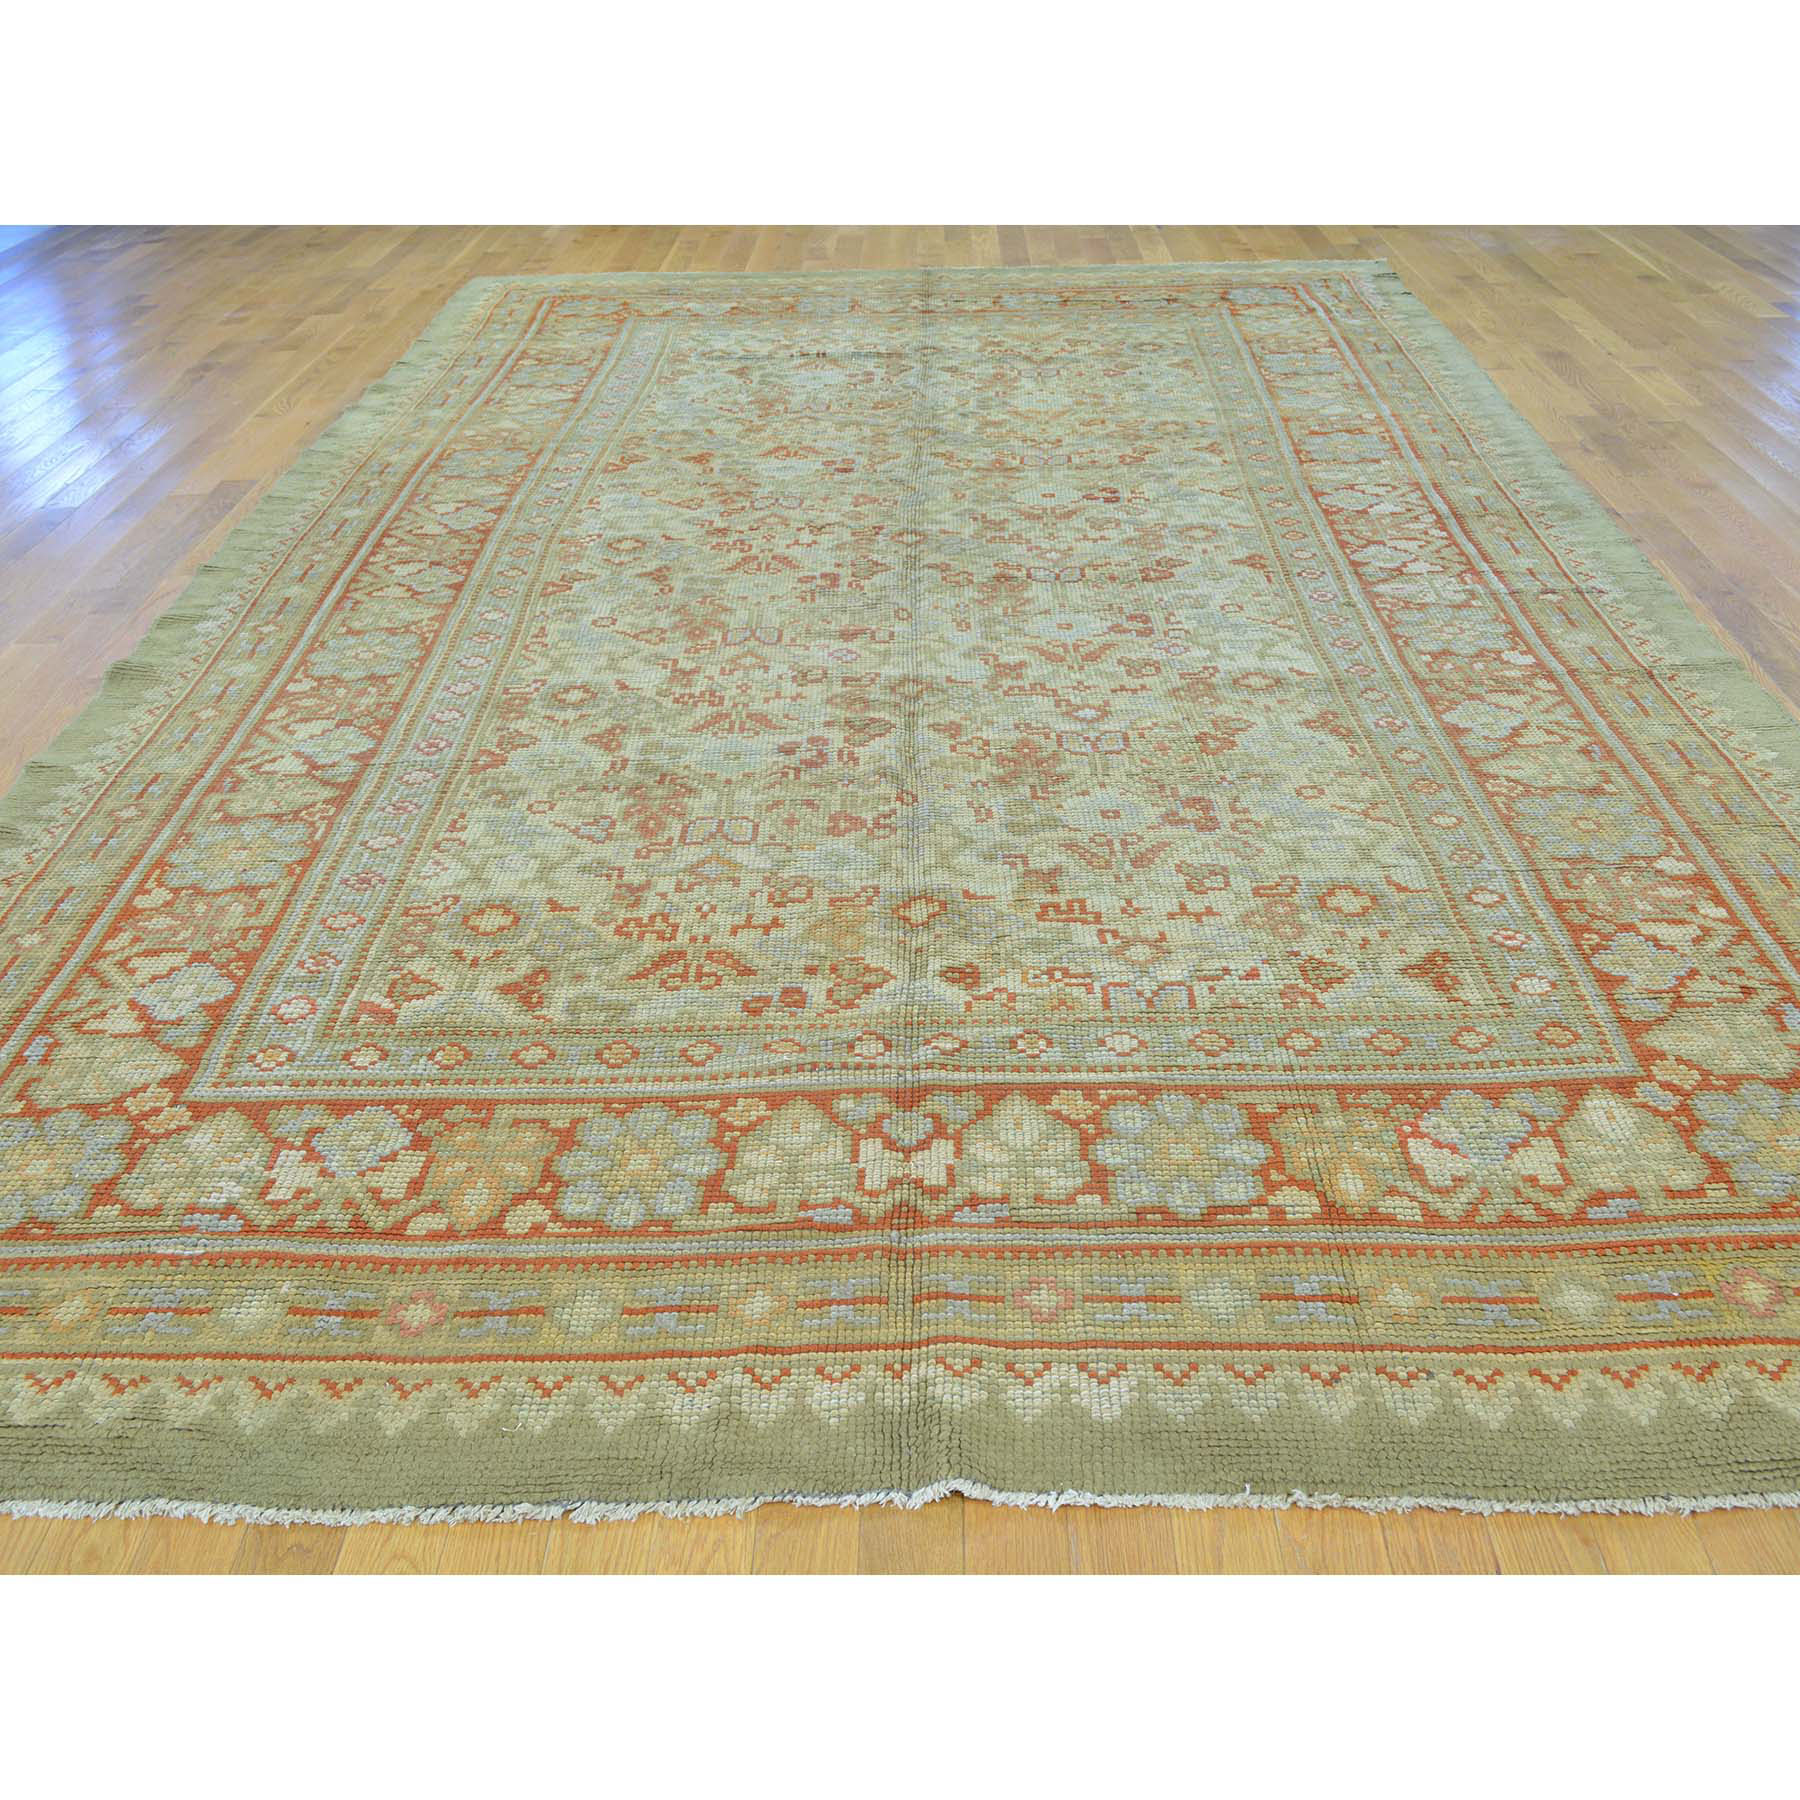 8-7 x14-9  Gallery Size Antique European Donegal Exc Cond Pure Wool Rug 